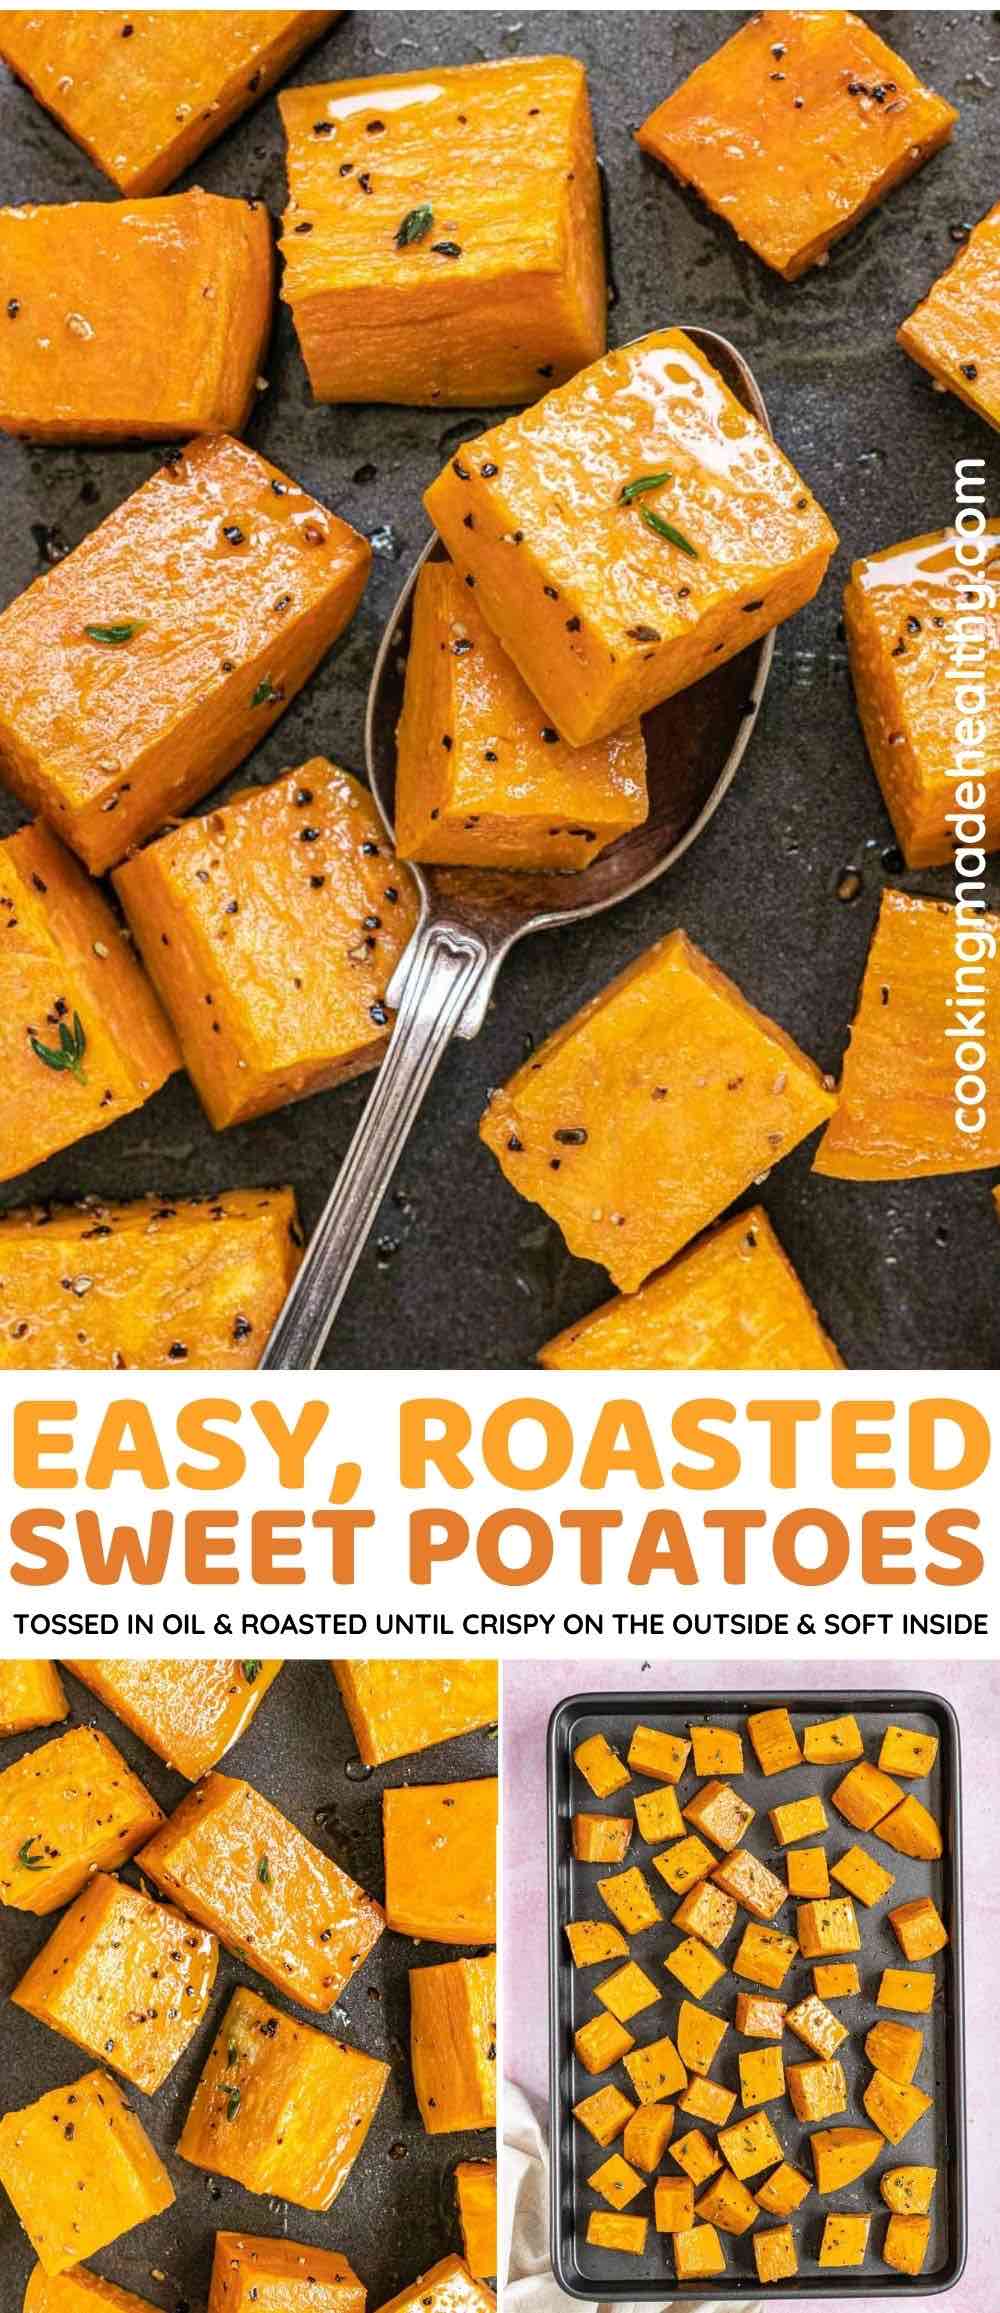 Roasted Sweet Potatoes collage